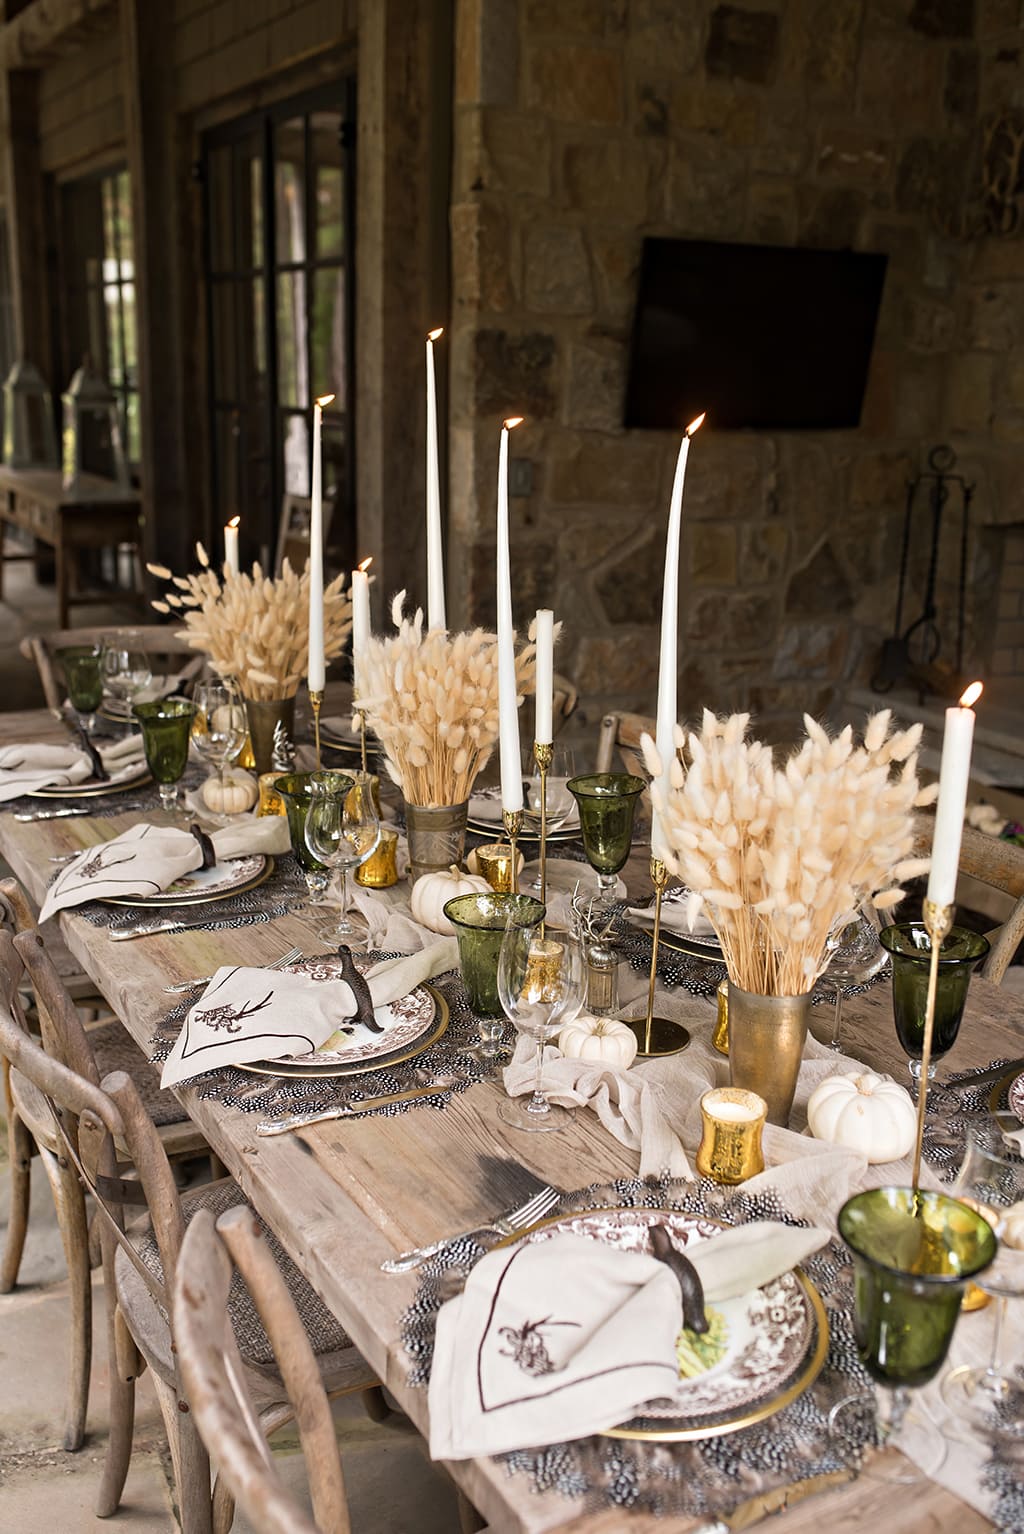 A rustic looking Thanksgiving table with clusters of wheat tied with ribbons for the center of the table with tapered candles. Light green accents with pheasant feathers as placemats.